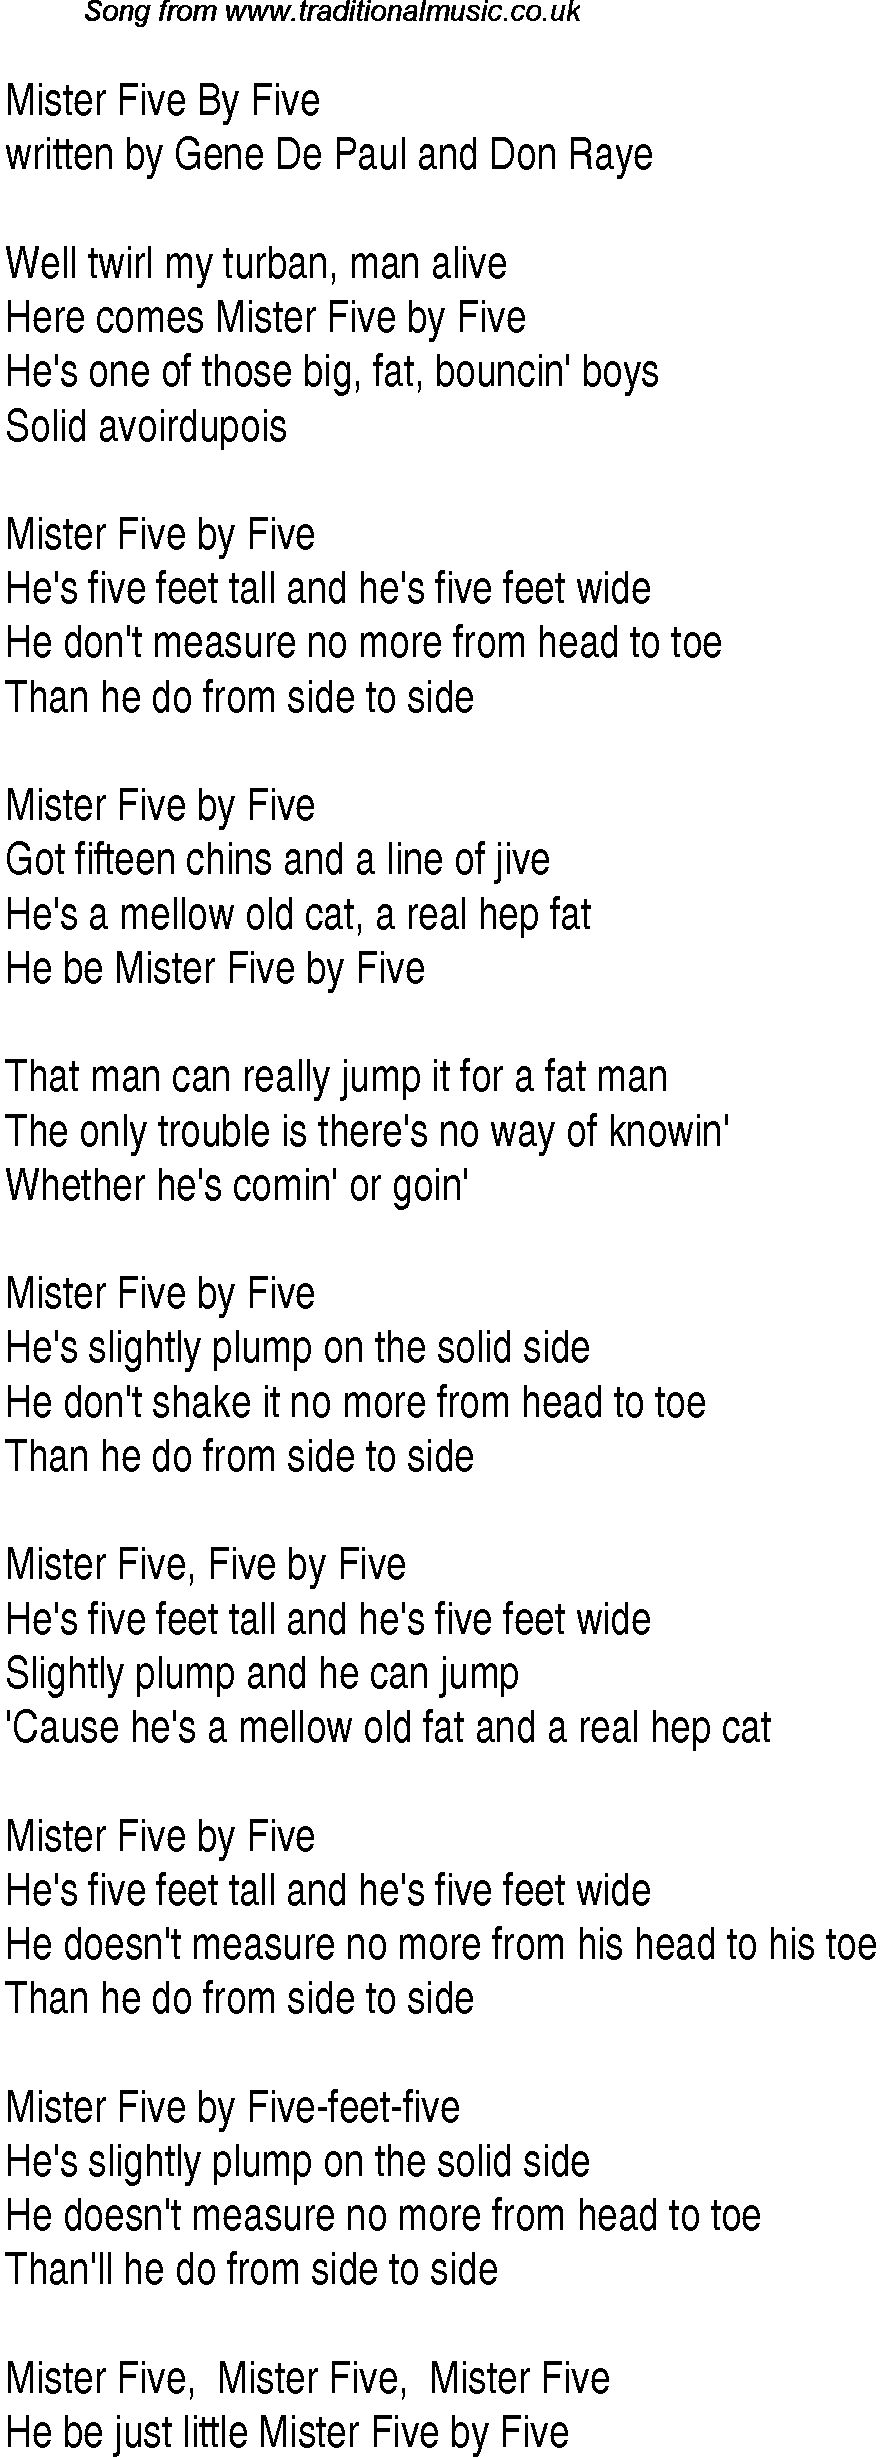 Music charts top songs 1943 - lyrics for Mister Five By Five